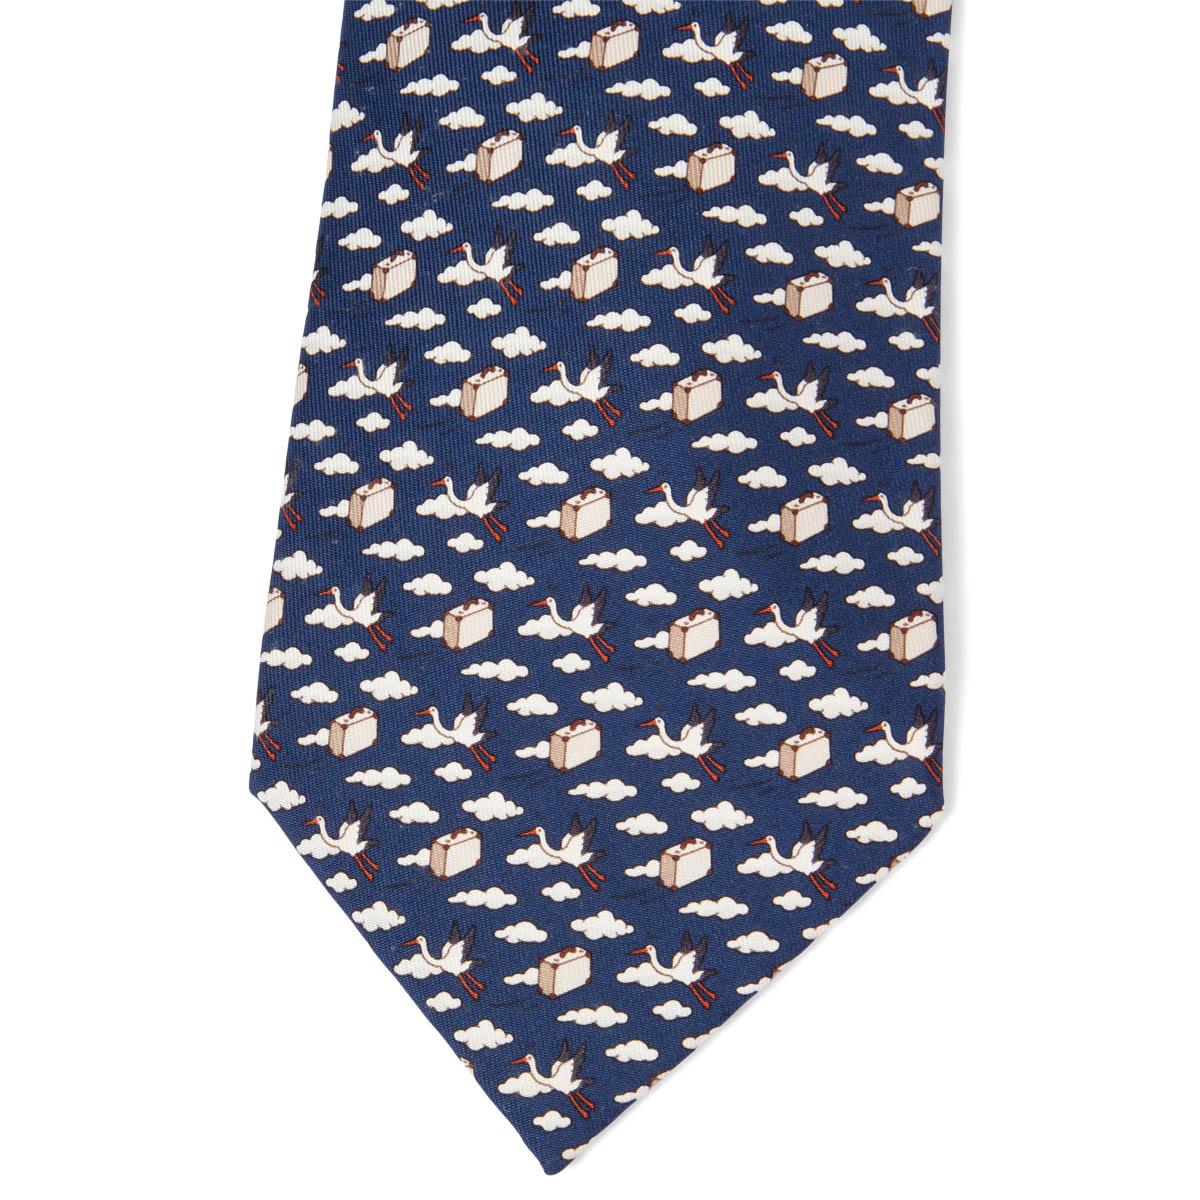 100% authentic Hermes Bird Express ties in dark blue, beige and red silk twill (100%). Has been worn and is in excellent condition. No Box.

Measurements
Model	5454
Length	156cm (60.8in)
Widest Point	9cm (3.54in)

All our listings include only the